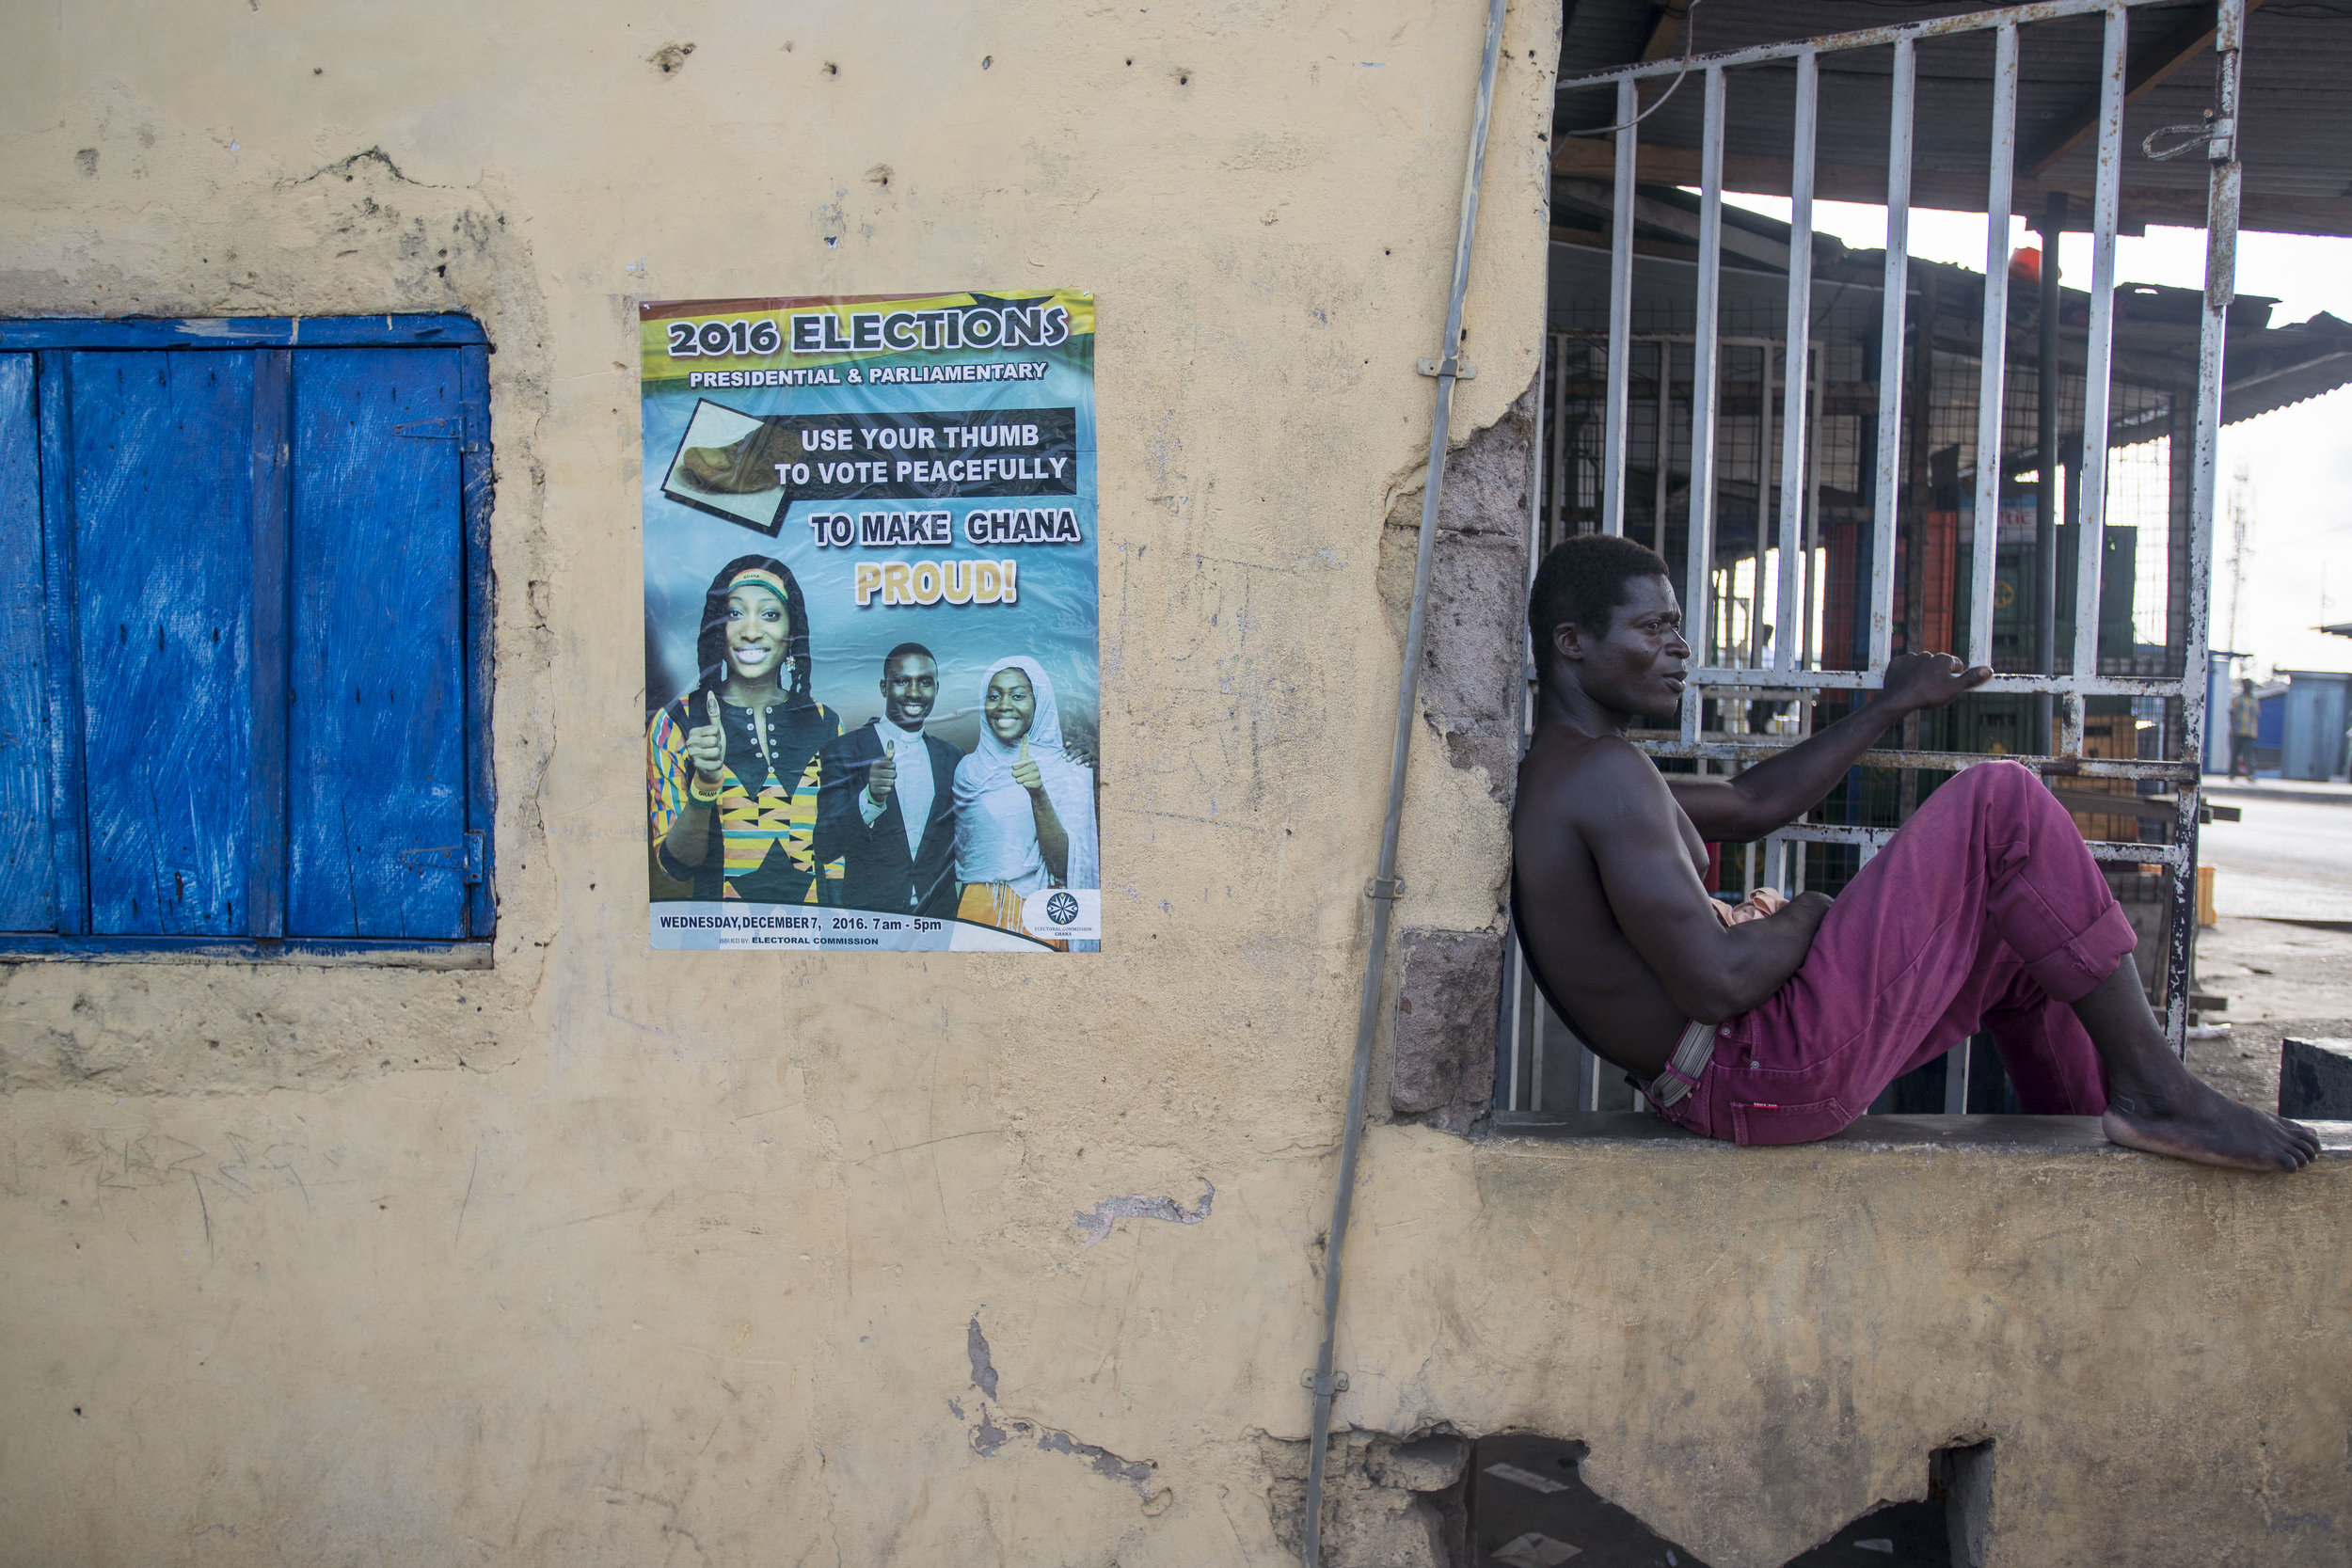  A man rest in a tailor shop on the neighbourhood of Teshie, Accra. As the country prepares for the incoming general election on 7th December, billboards and advertising promoting a peaceful election can be seen all around the city of Accra 